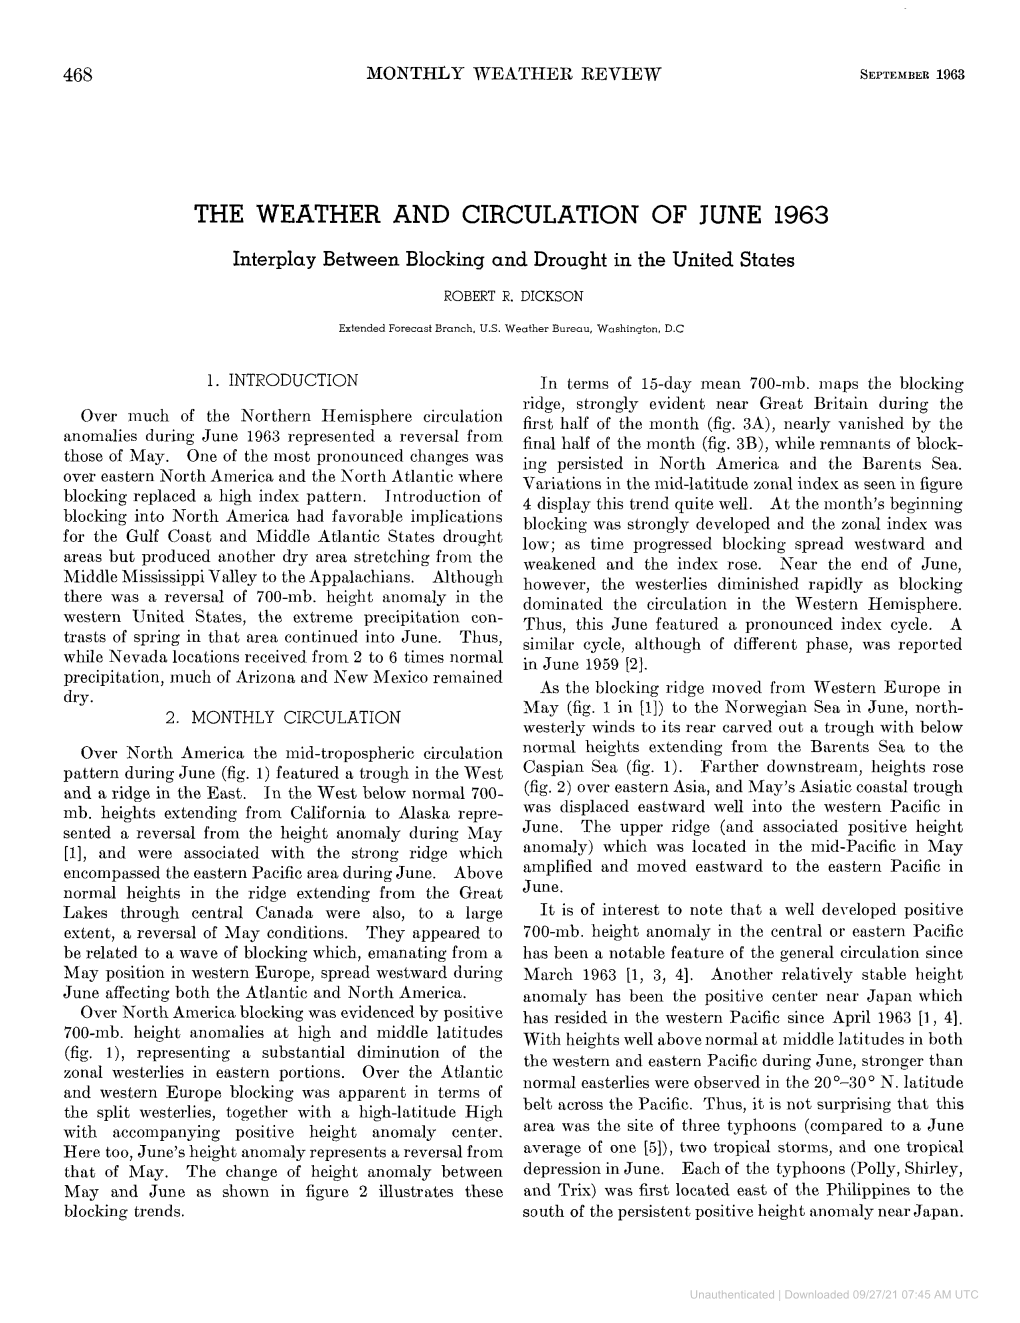 The Weather and Circulation of June 1963